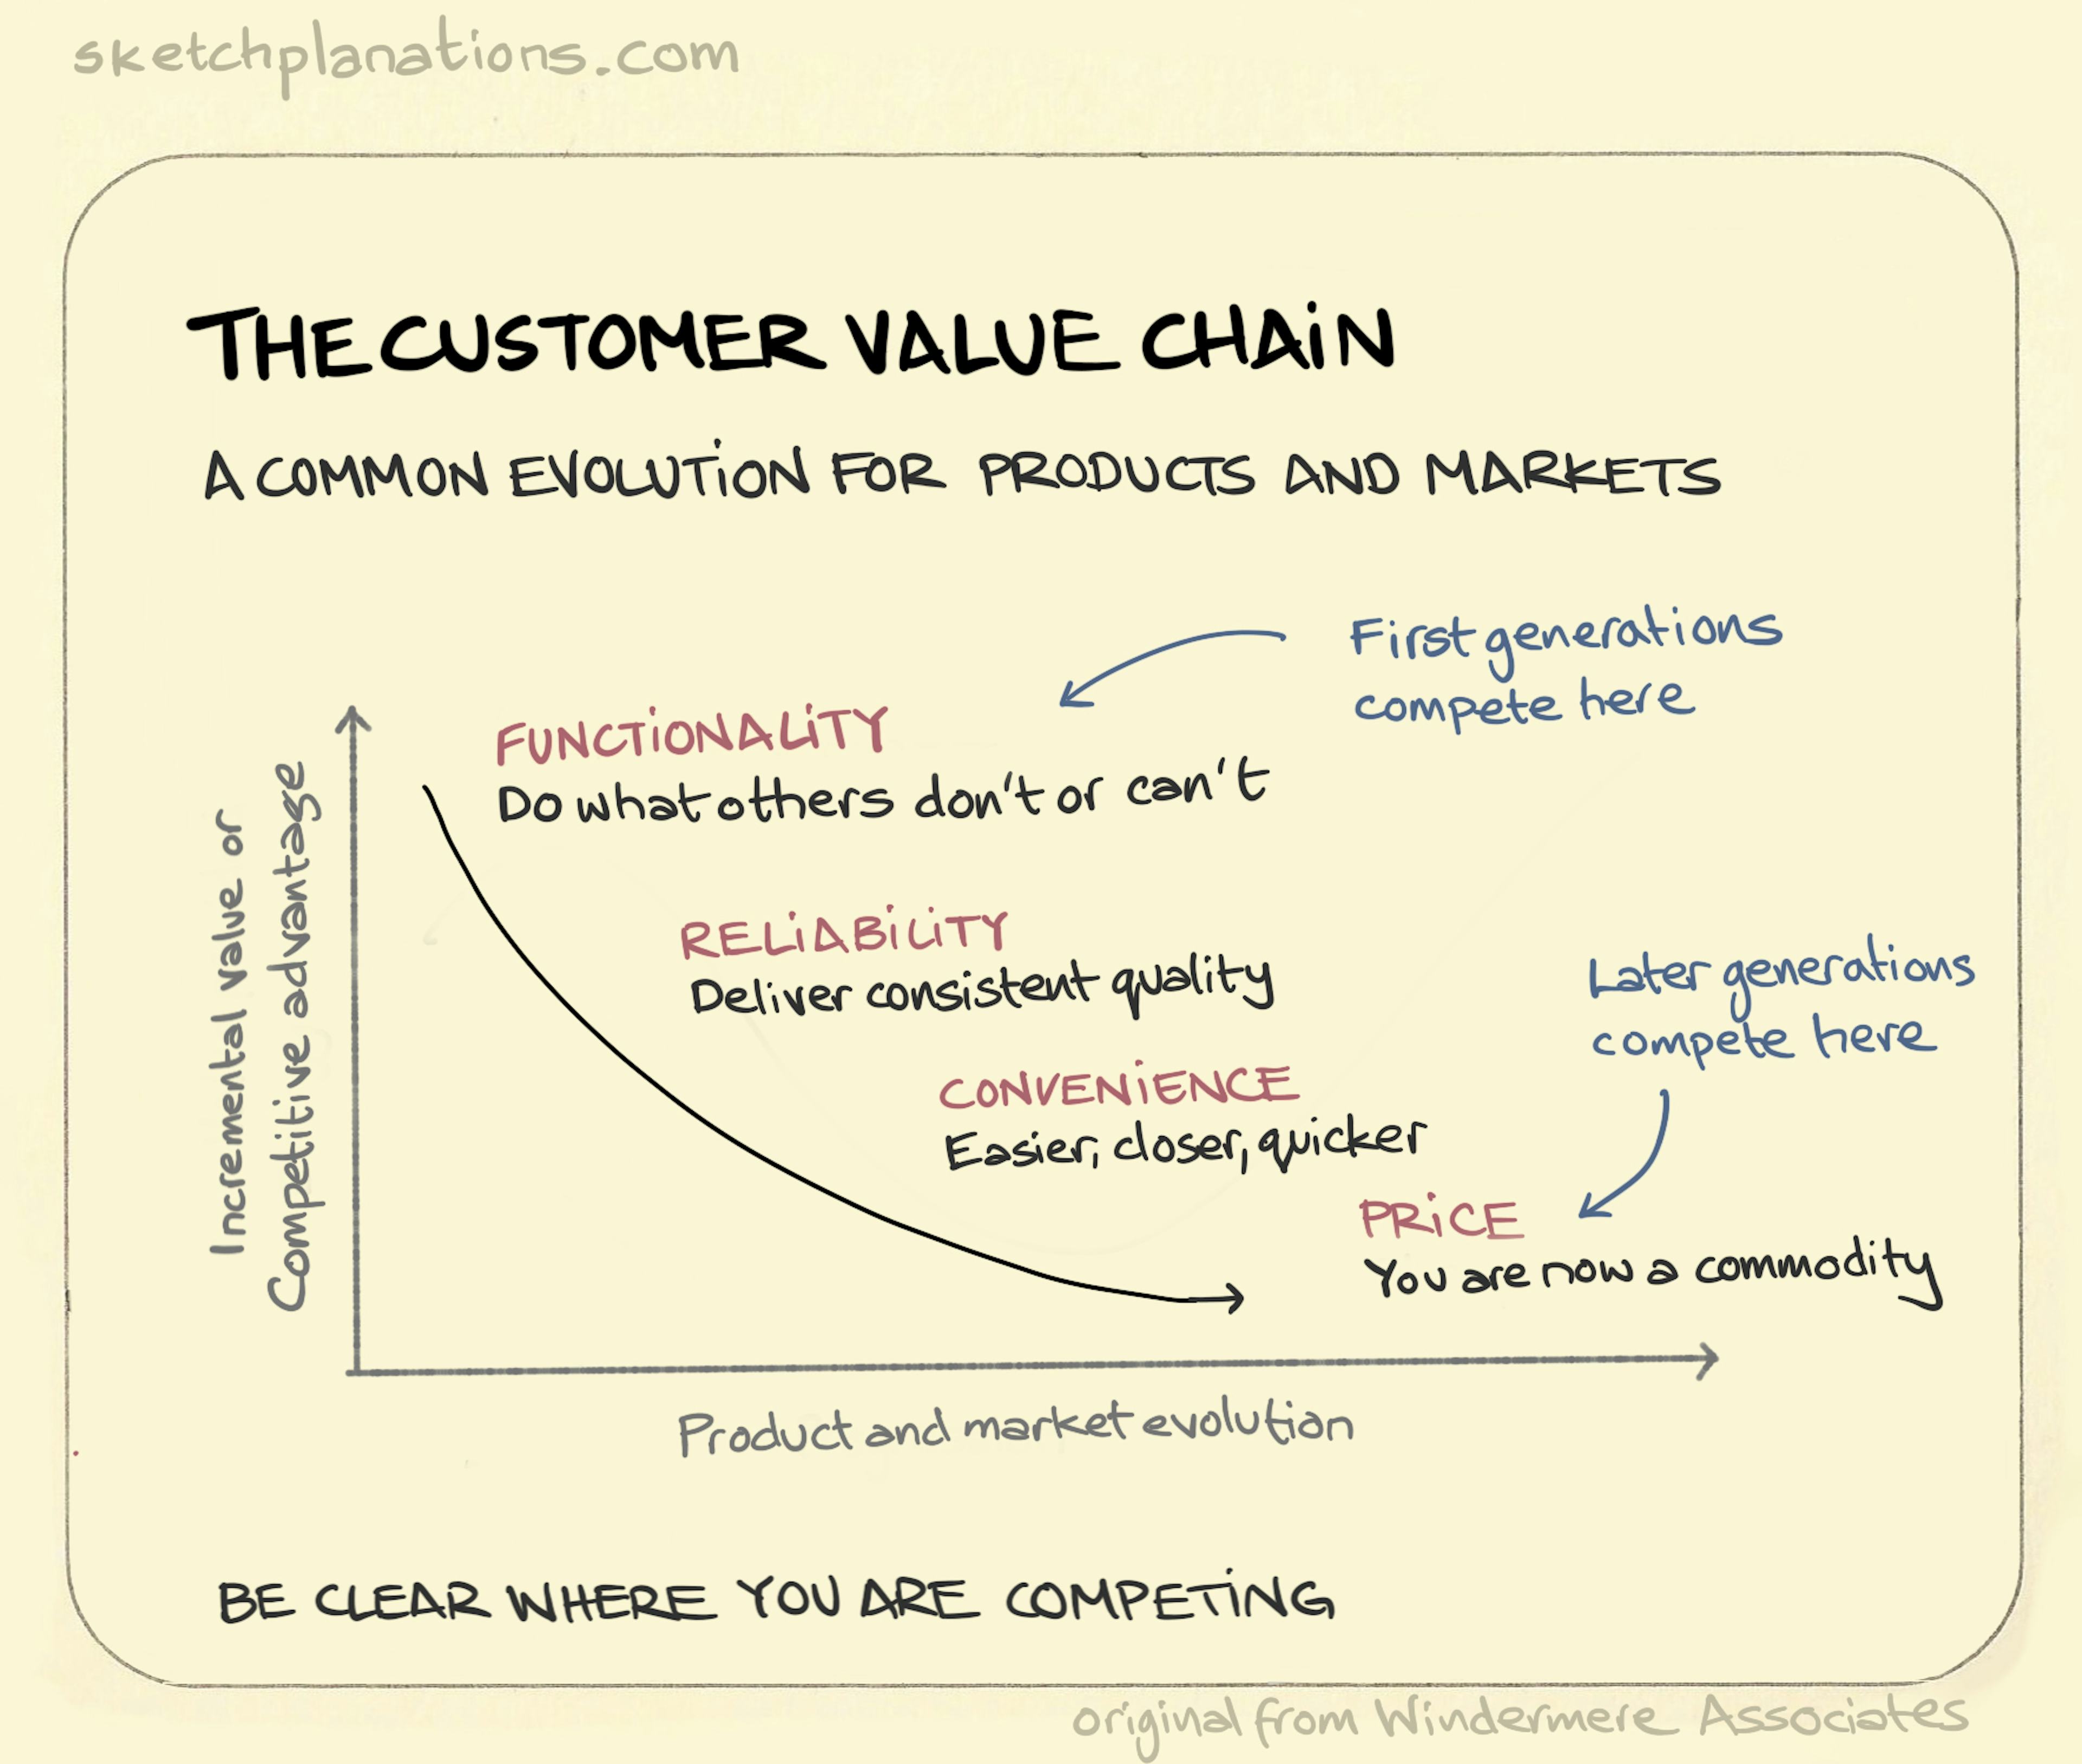 The customer value chain illustration: a concave up, decreasing line graph shows the different elements of competitive advantage at play as a new product or market evolves over time. 